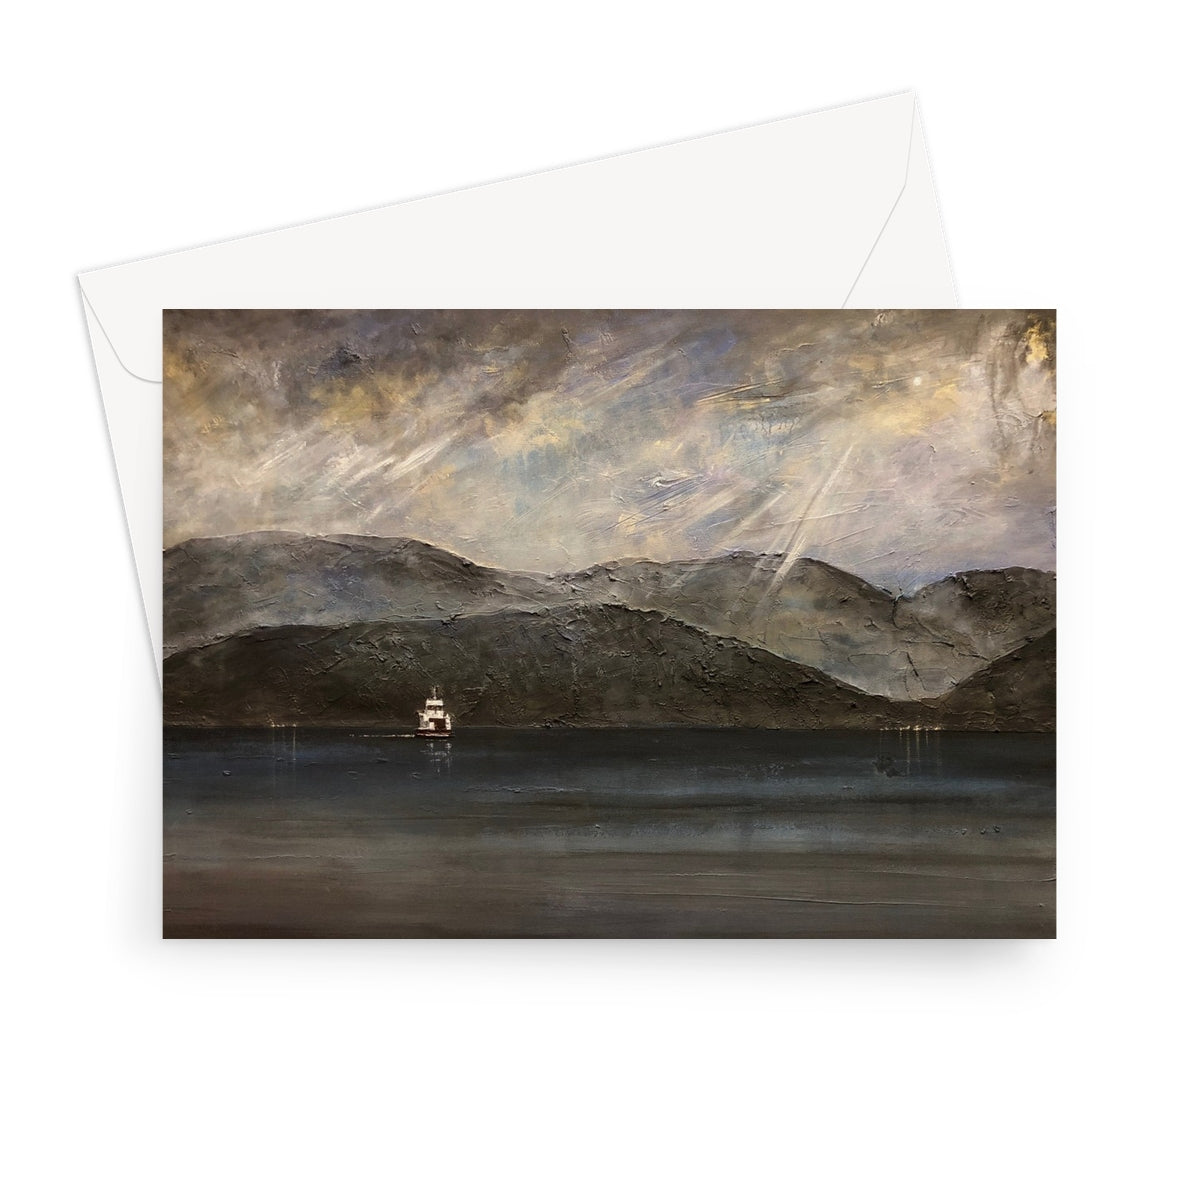 Lochranza Moonlit Ferry Arran Art Gifts Greeting Card-Greetings Cards-Arran Art Gallery-7"x5"-10 Cards-Paintings, Prints, Homeware, Art Gifts From Scotland By Scottish Artist Kevin Hunter